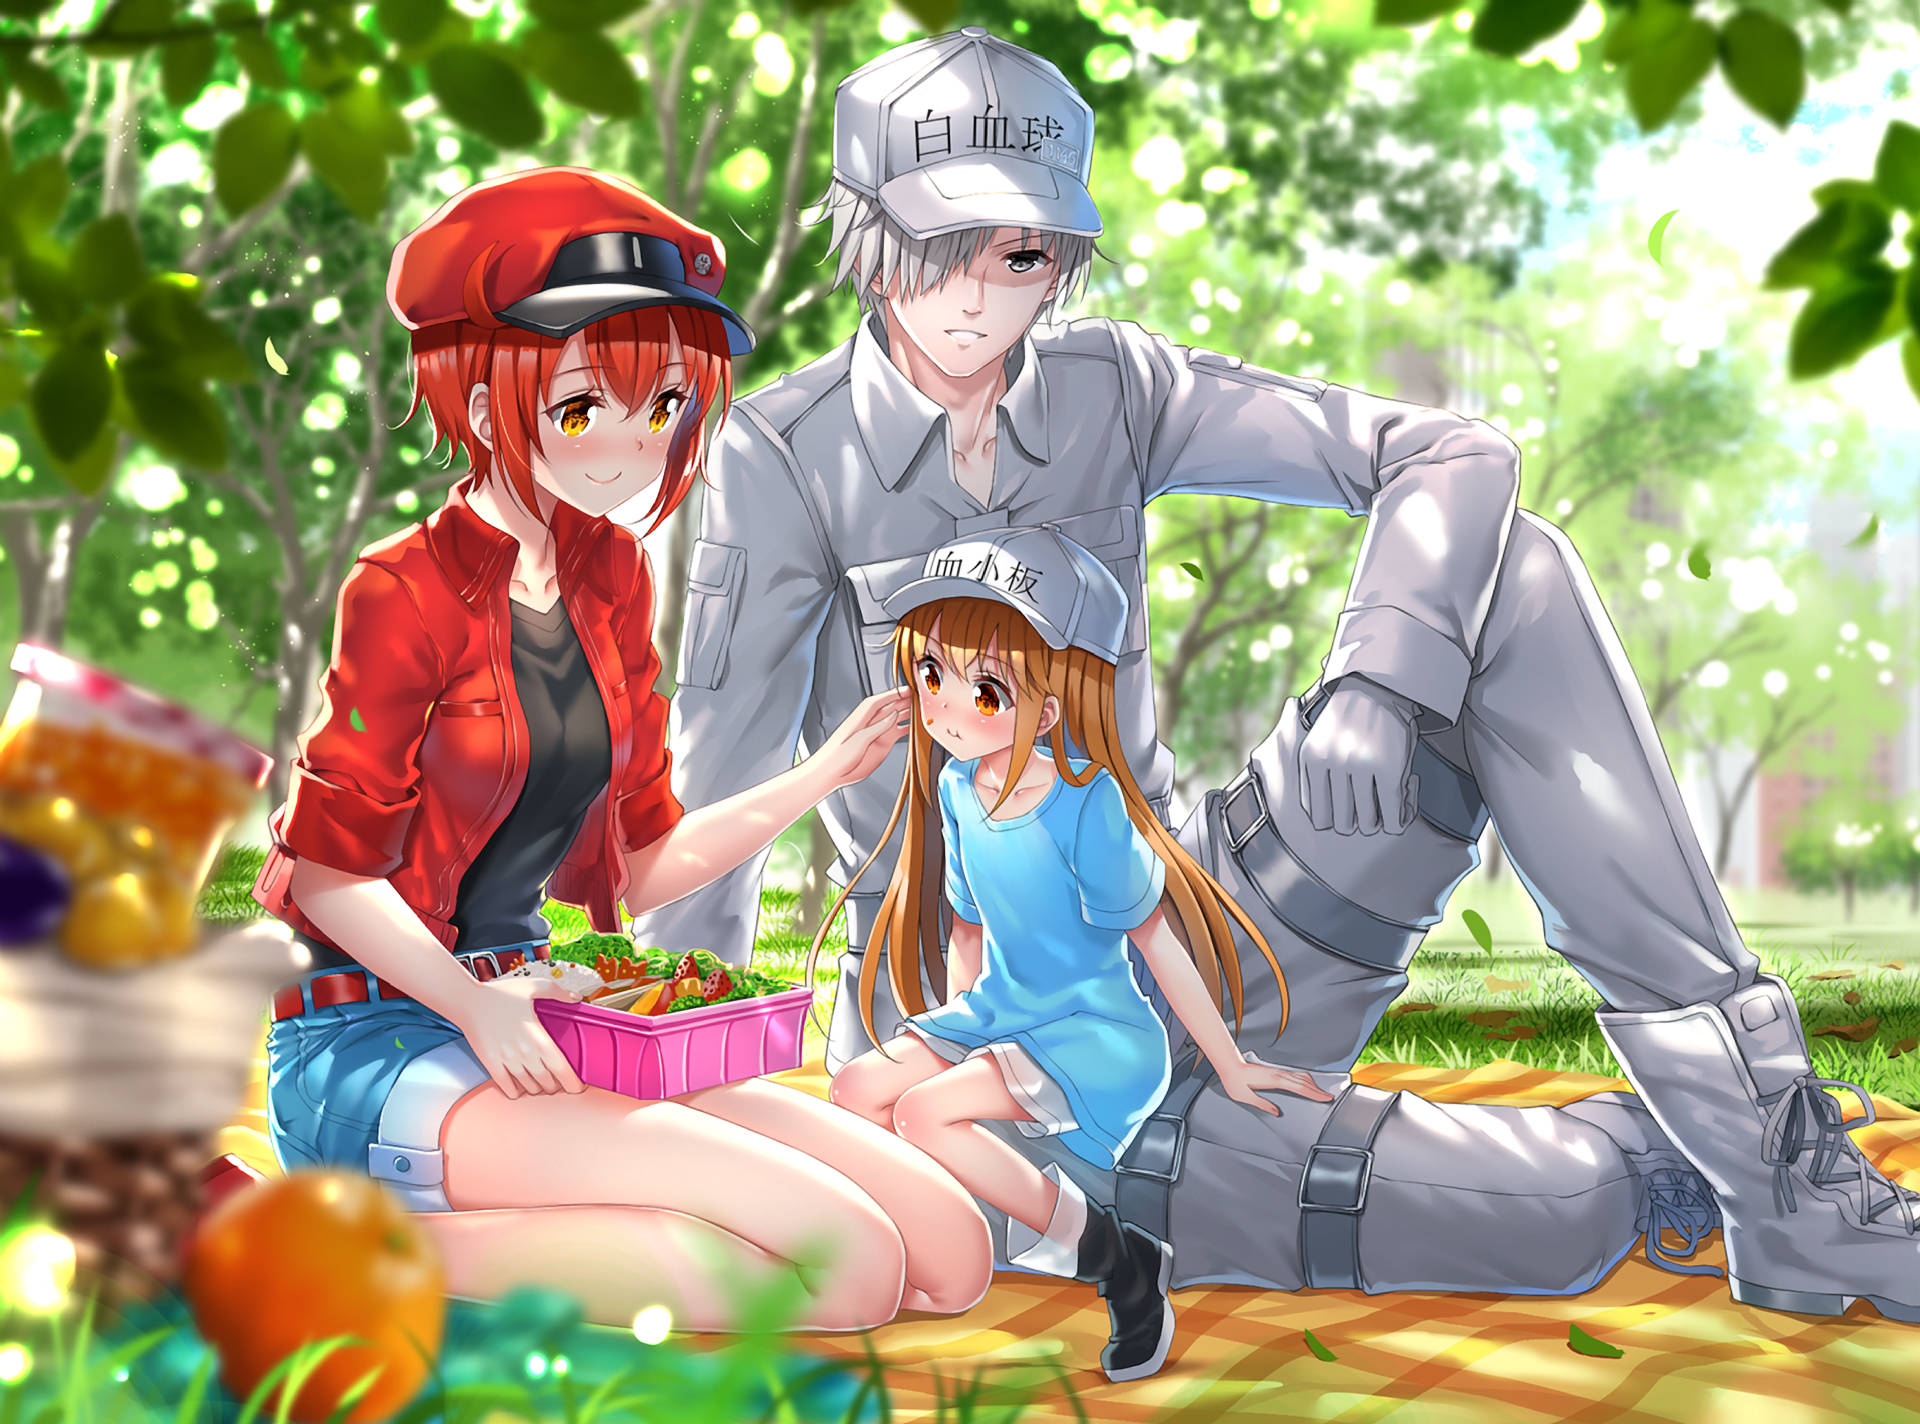 Cells At Work On Picnic Fanart